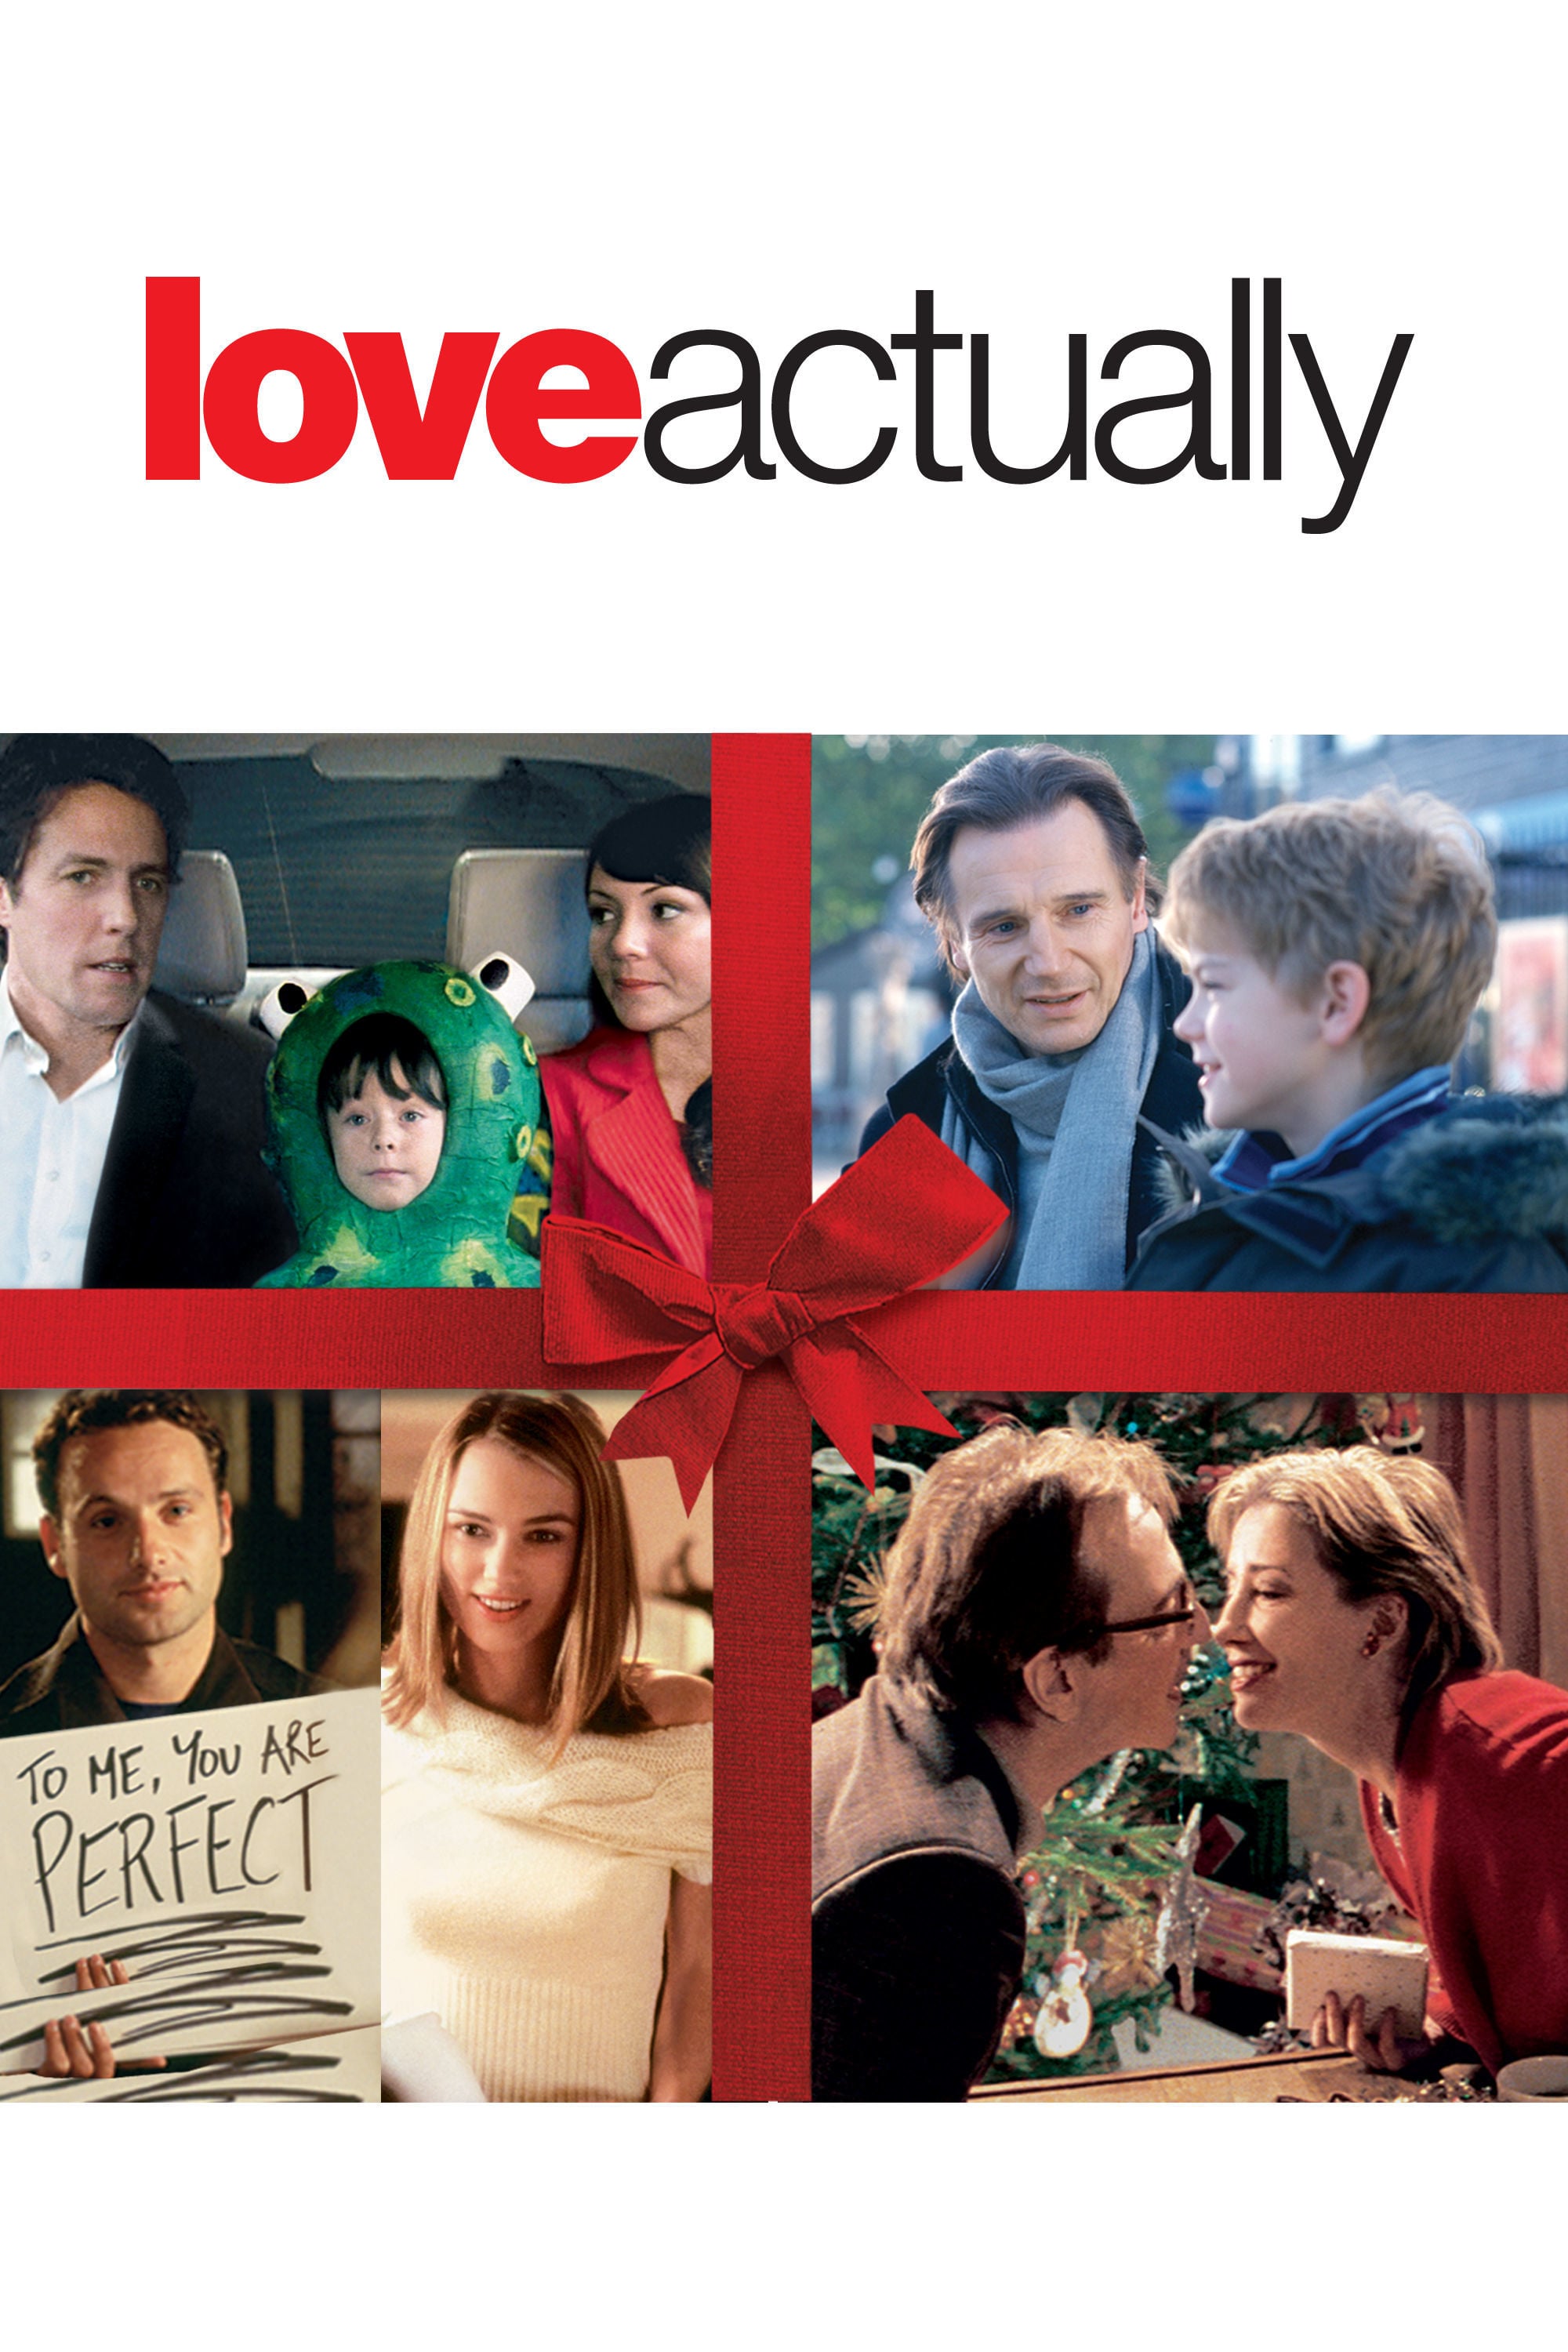 Poster of the movie Love Actually showing four snapshots of the characters and a ribbon separating them as though on a wrapped package.